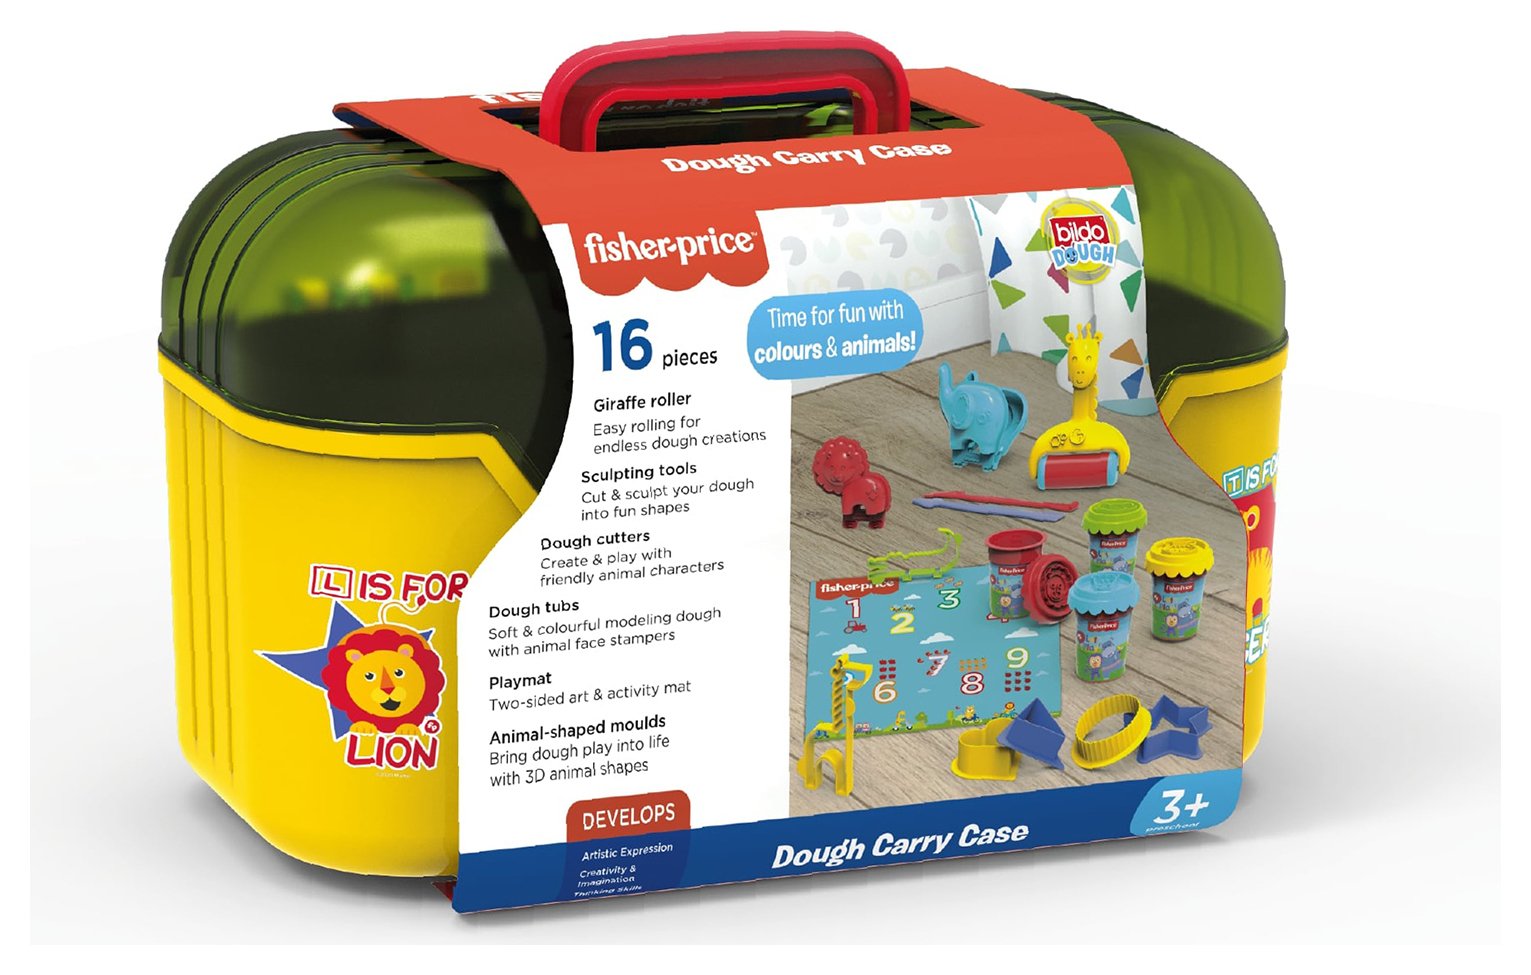 Fisher Price Dough Carry Case review